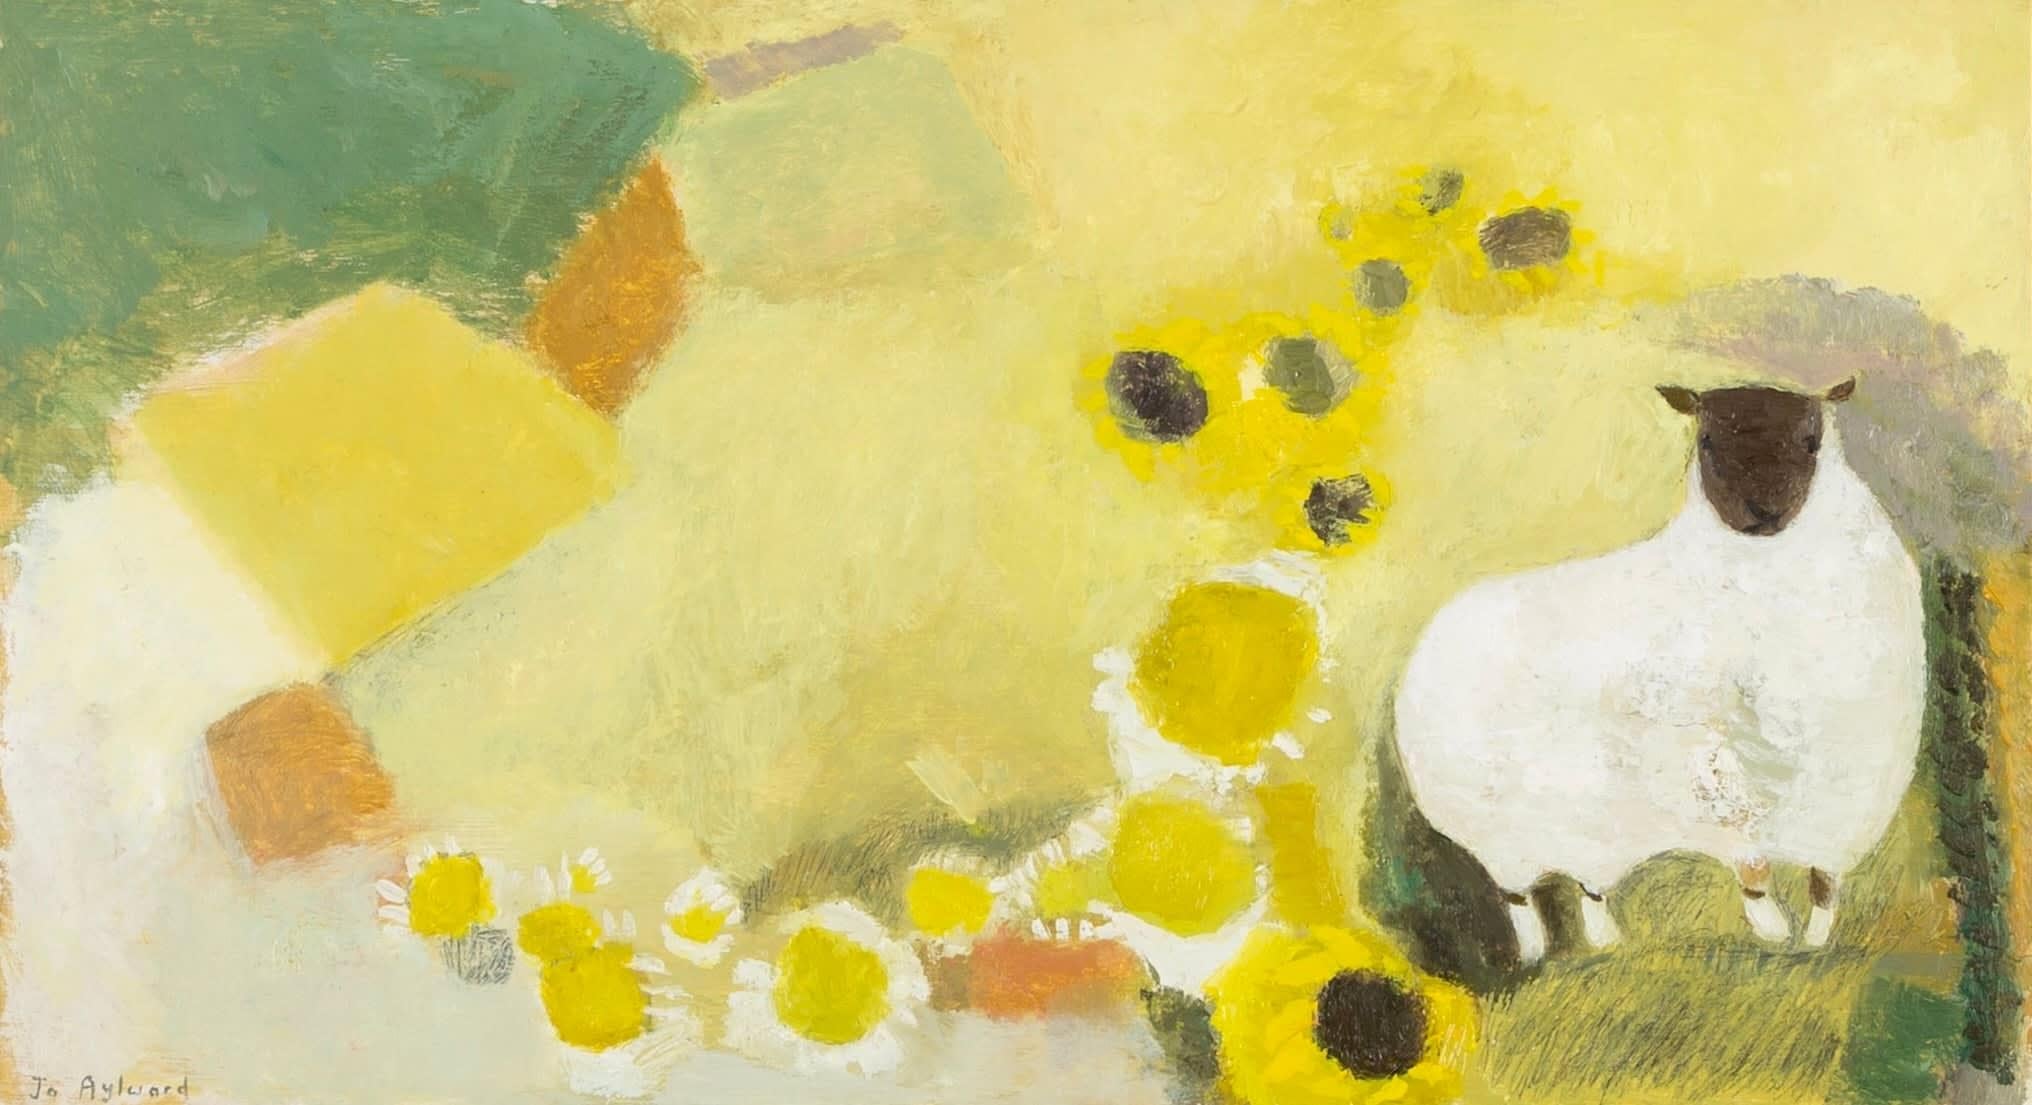 Unknown Animal Painting - Ewe in a Sunflower Field, Oil on Panel Painting by Jo Aylward, 2023